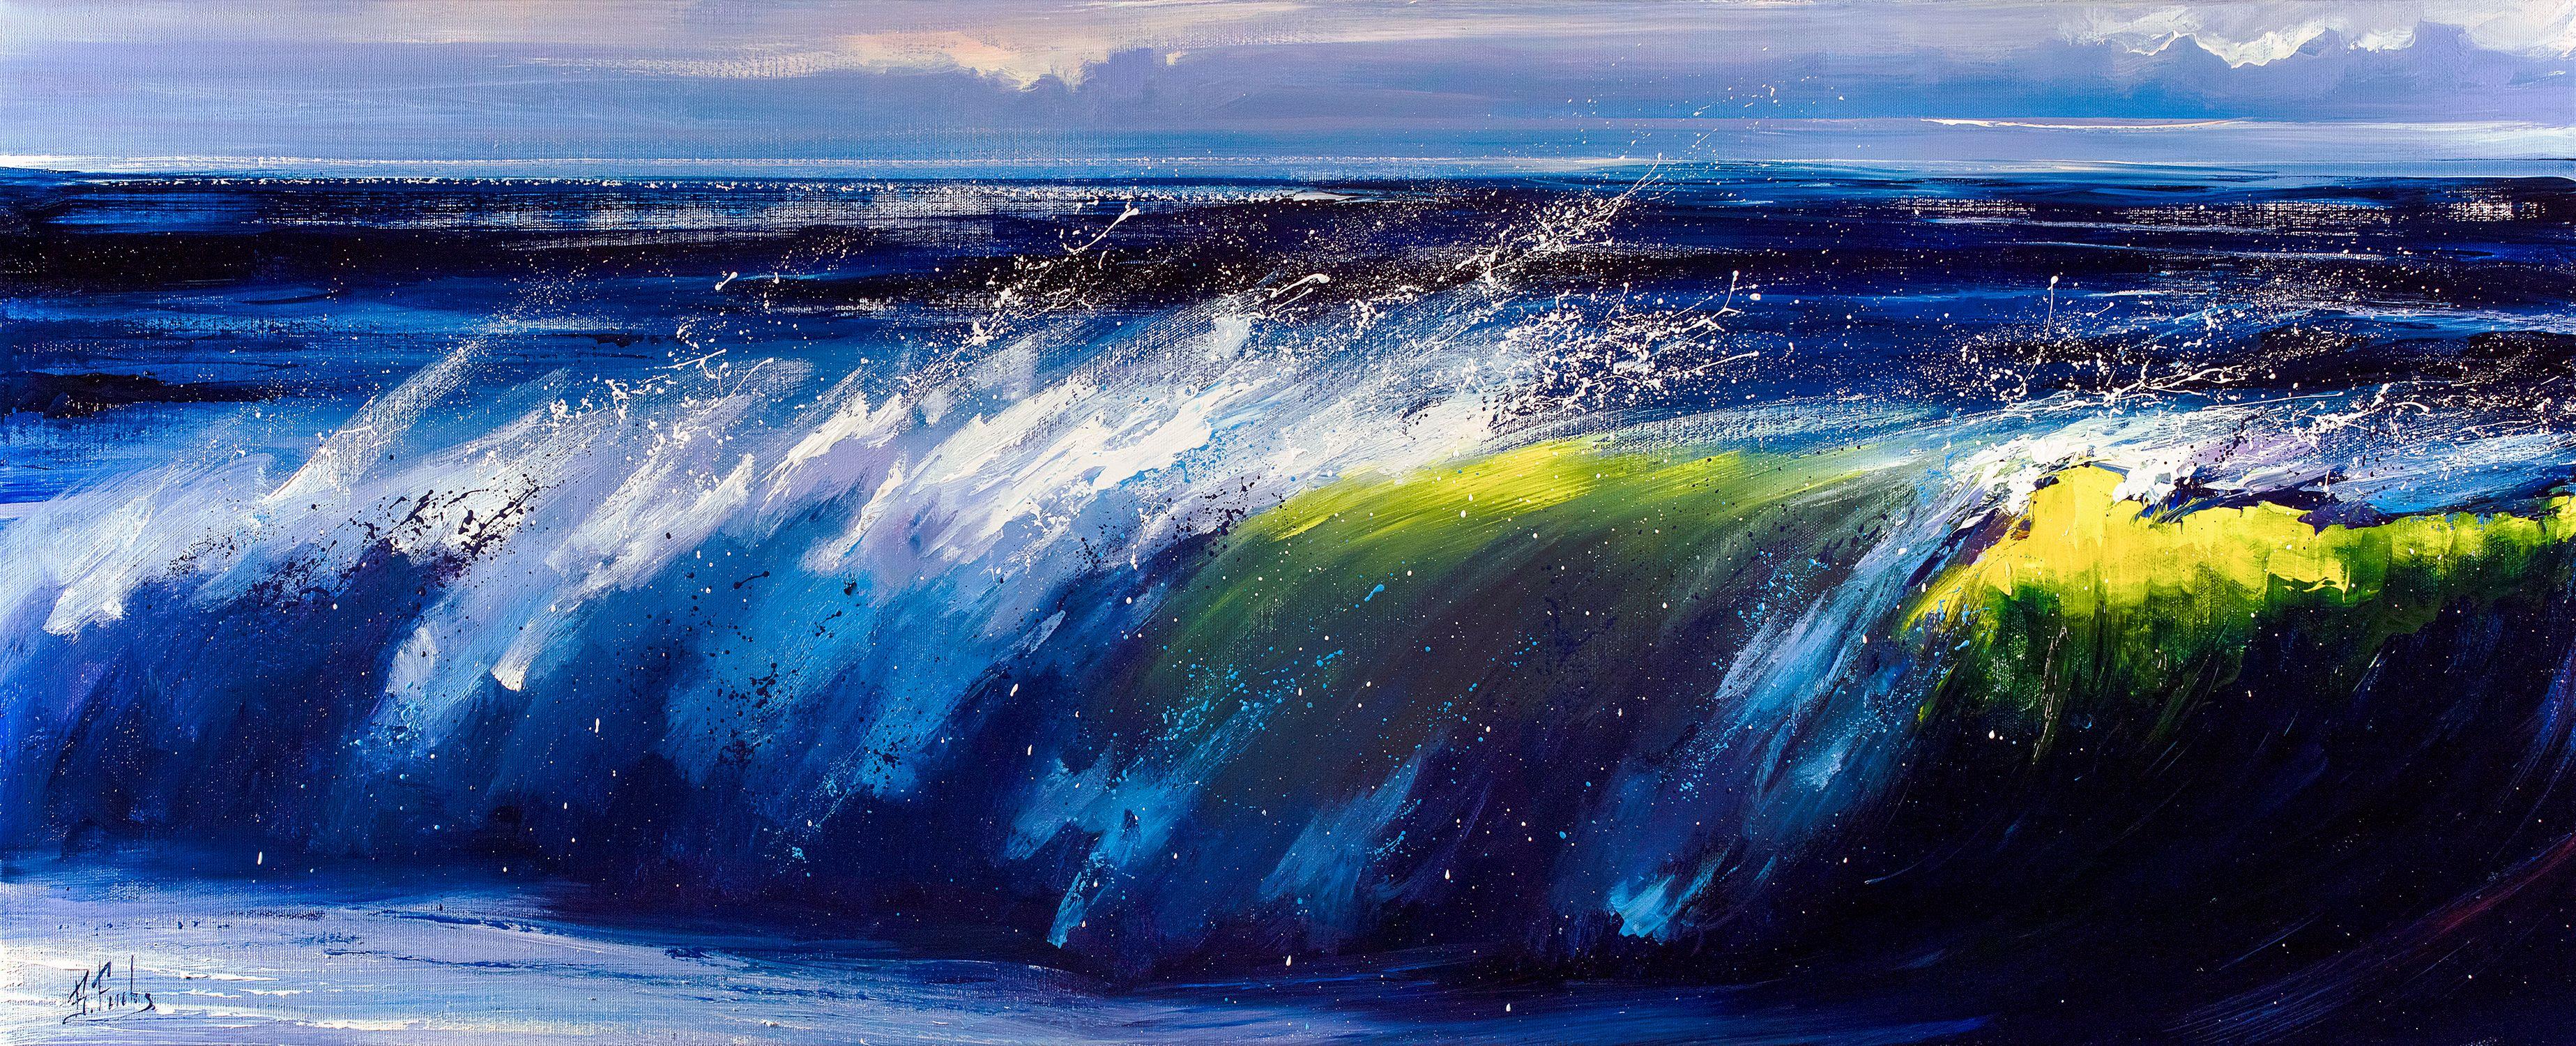 A green wave reflects the first rays of morning sun. Oil on canvas, Alla prima technique. :: Painting :: Contemporary :: This piece comes with an official certificate of authenticity signed by the artist :: Ready to Hang: Yes :: Signed: Yes ::